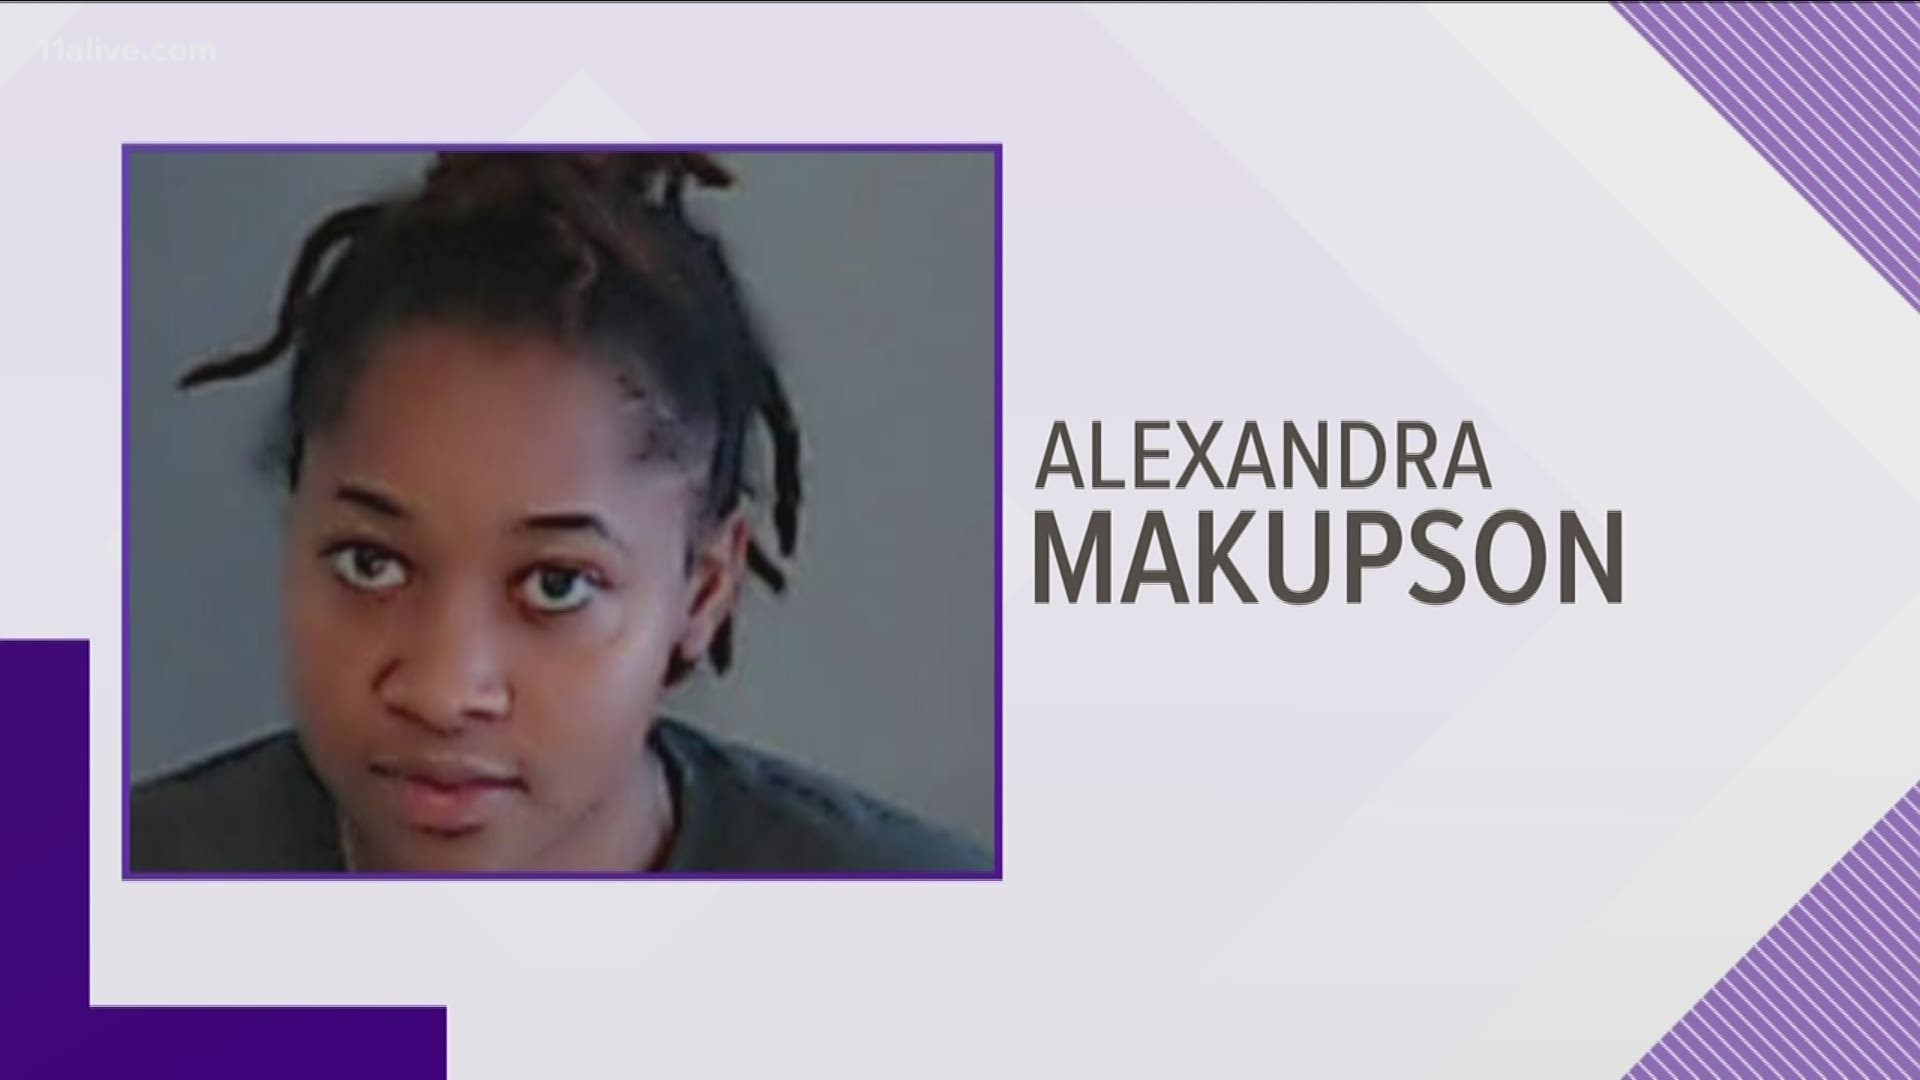 A judge set bond for 23-year-old Alexandria Makupson at $20,000.